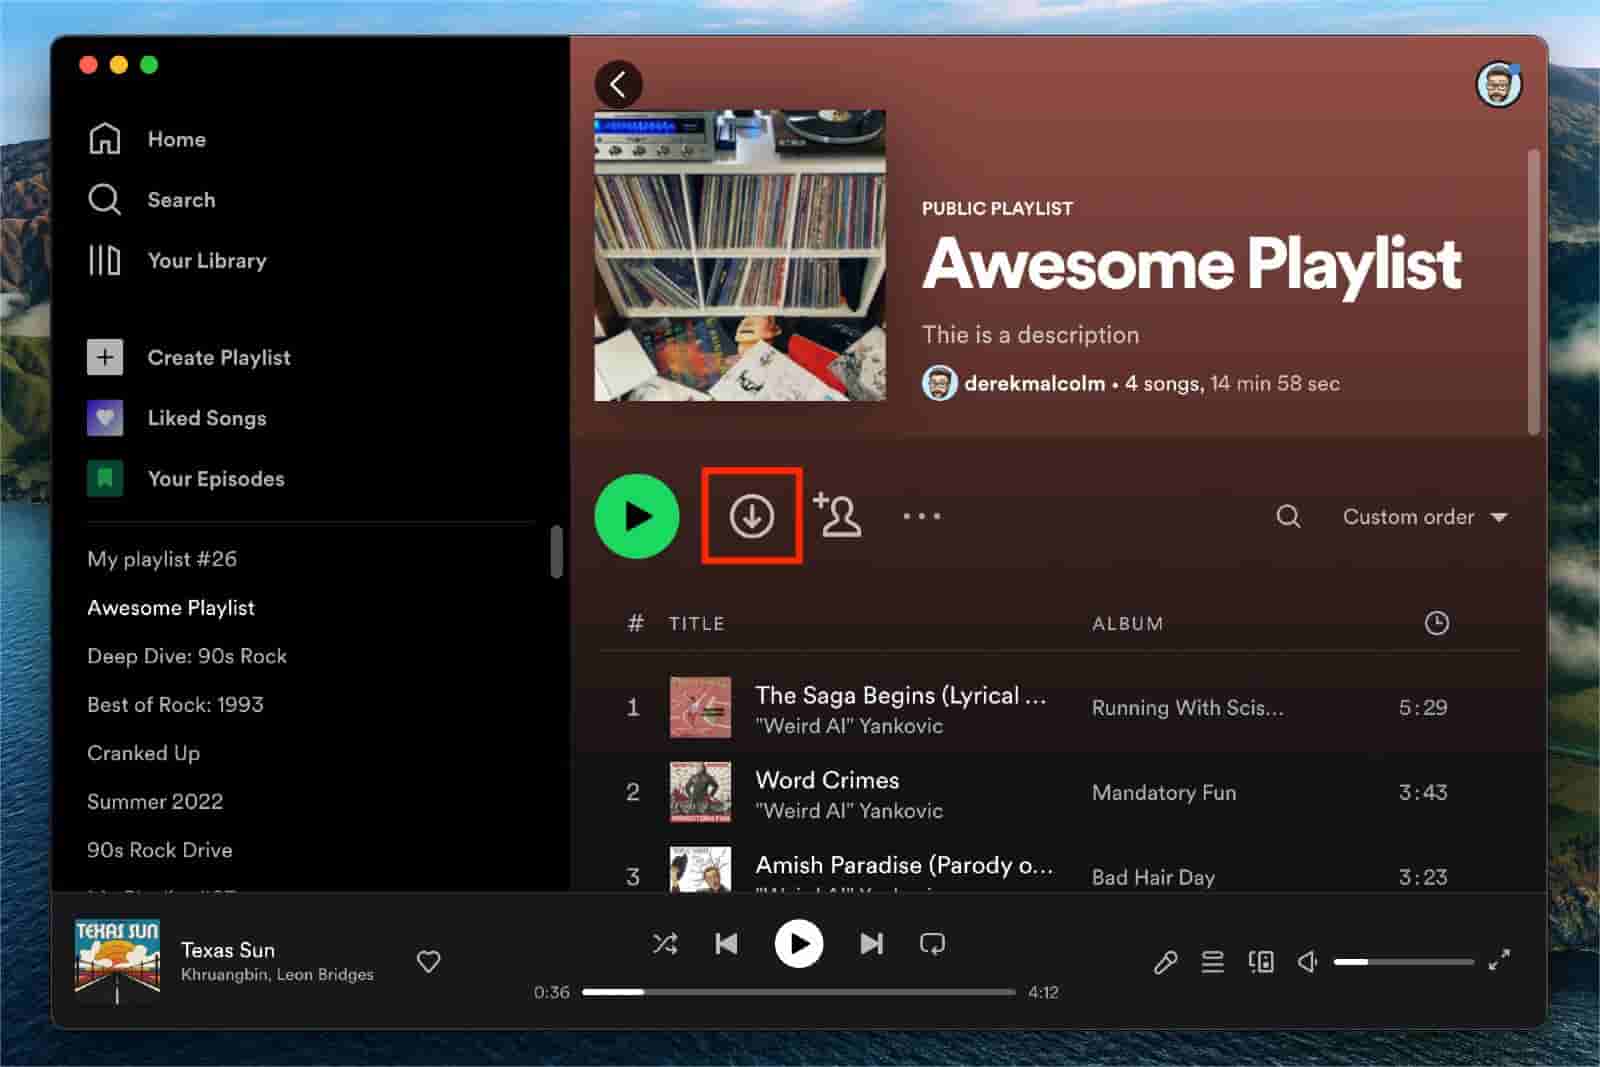 Download Music From Spotify On Desktop